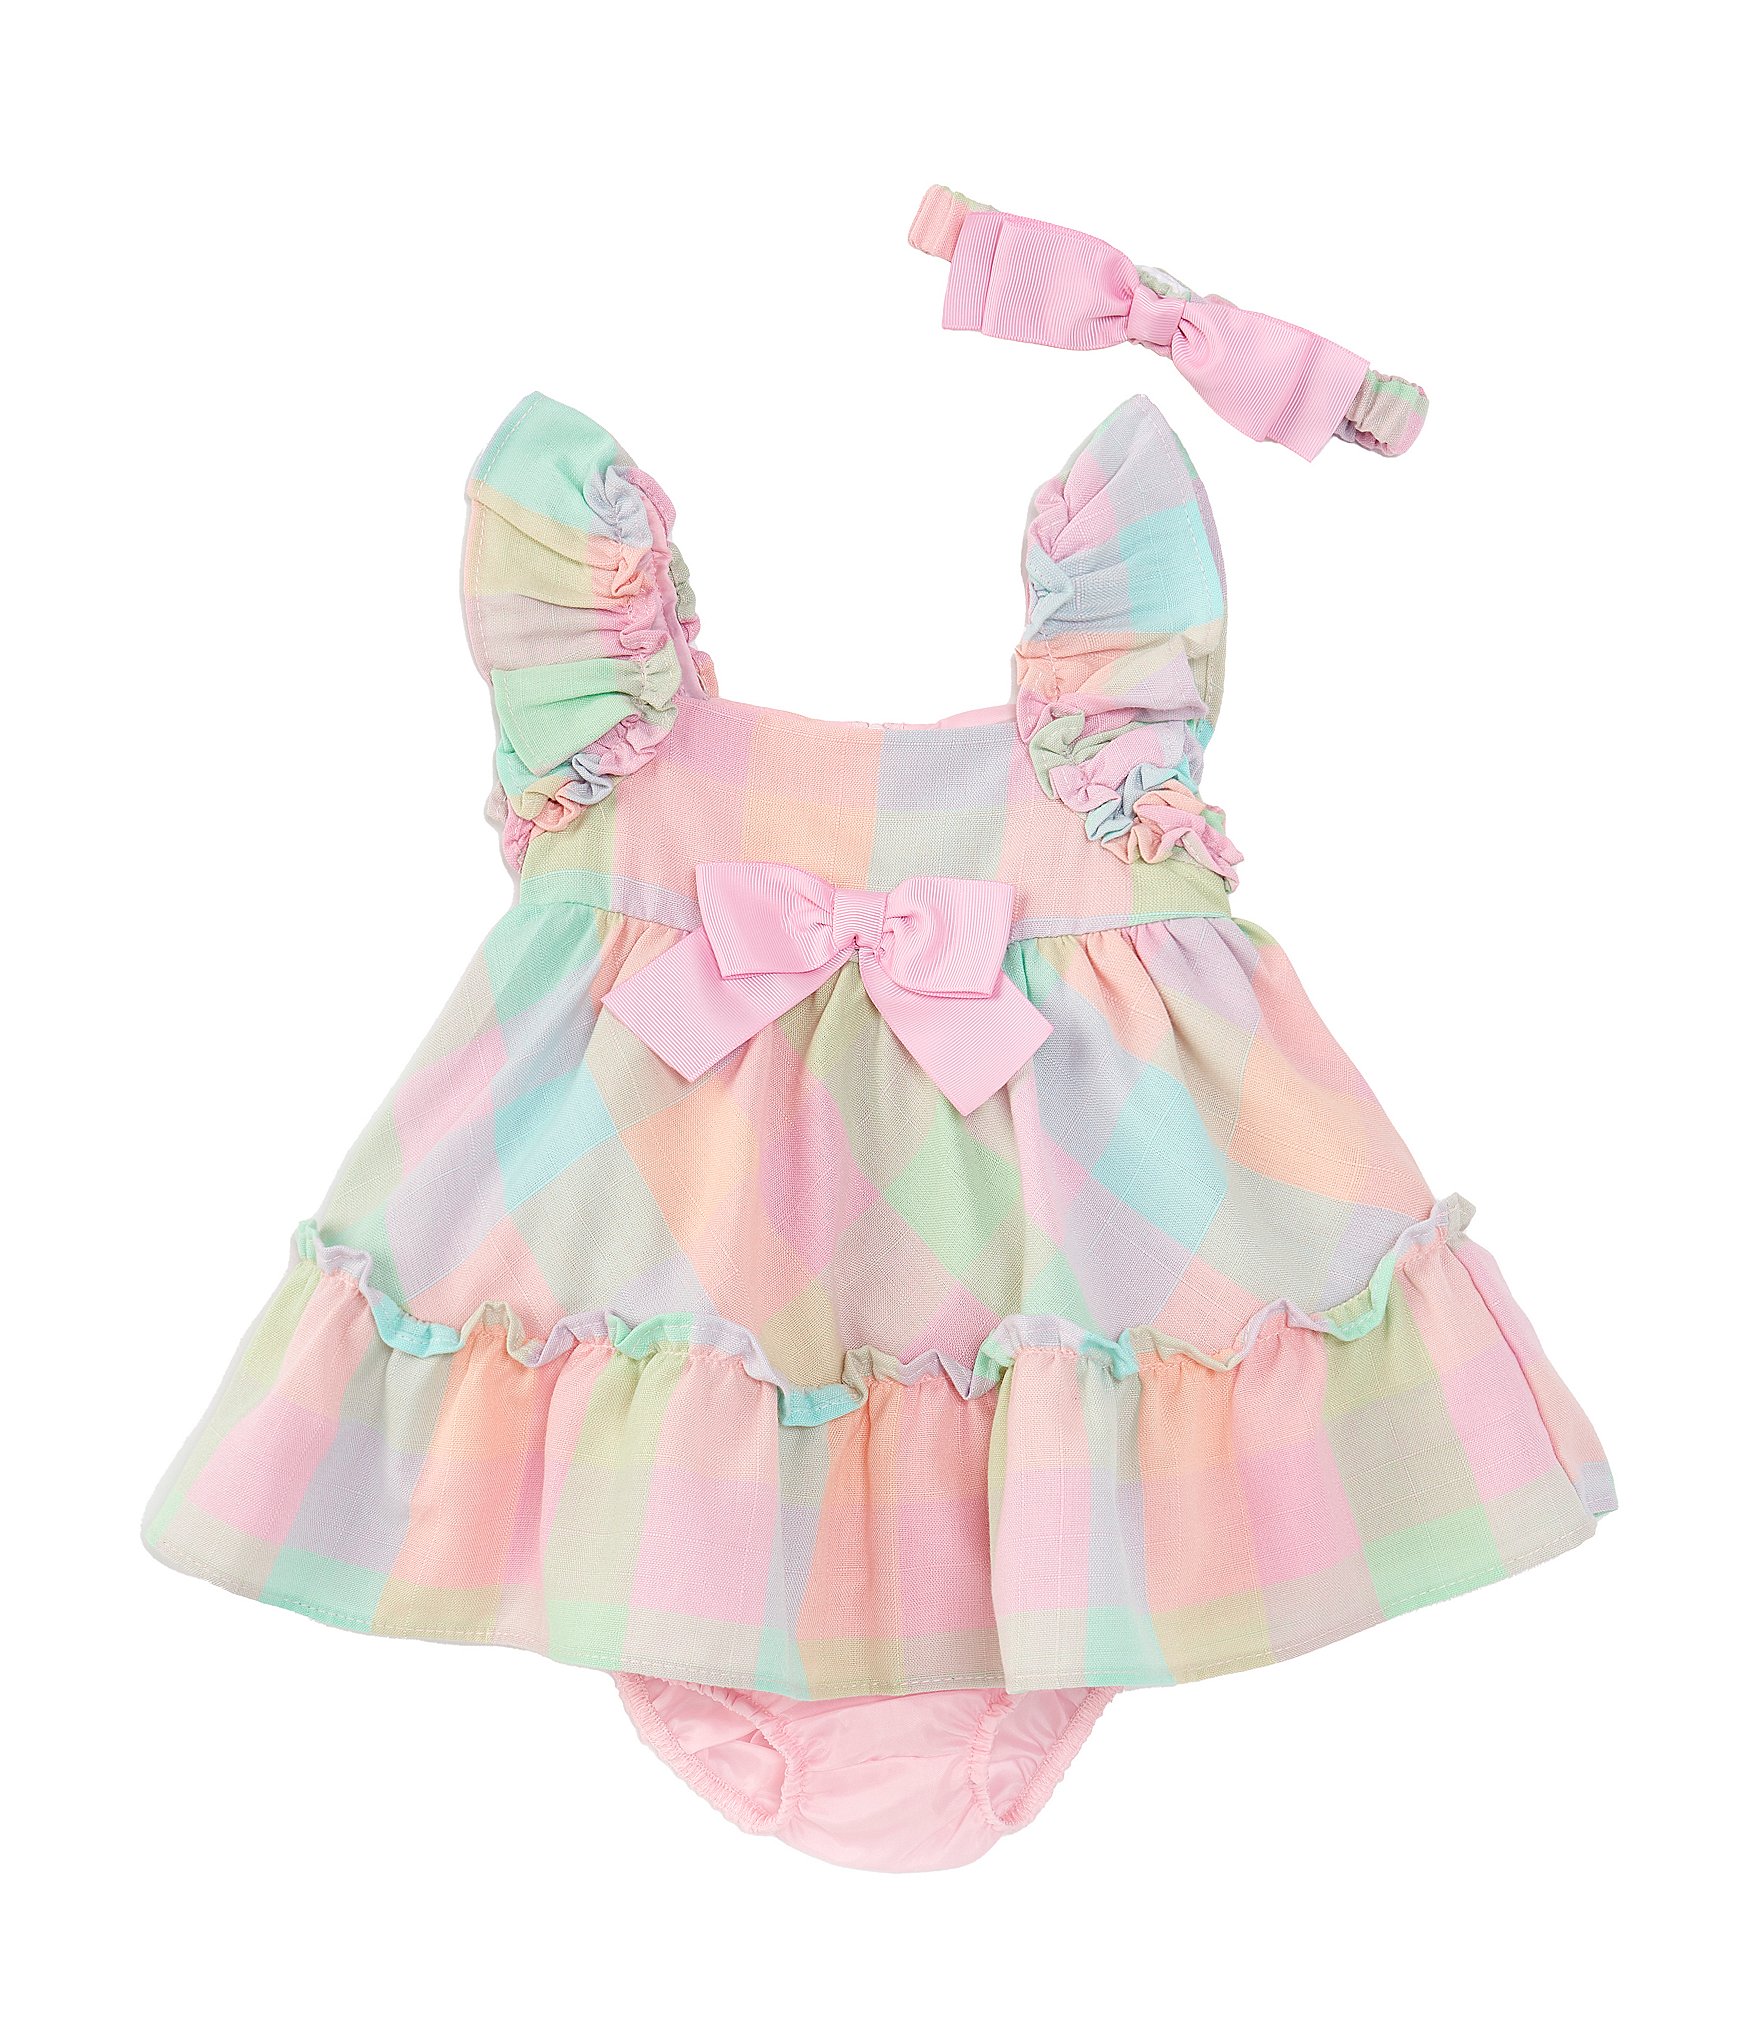 Cute and Fancy Toddler Girls Ruffle Underwear Accented with Bow